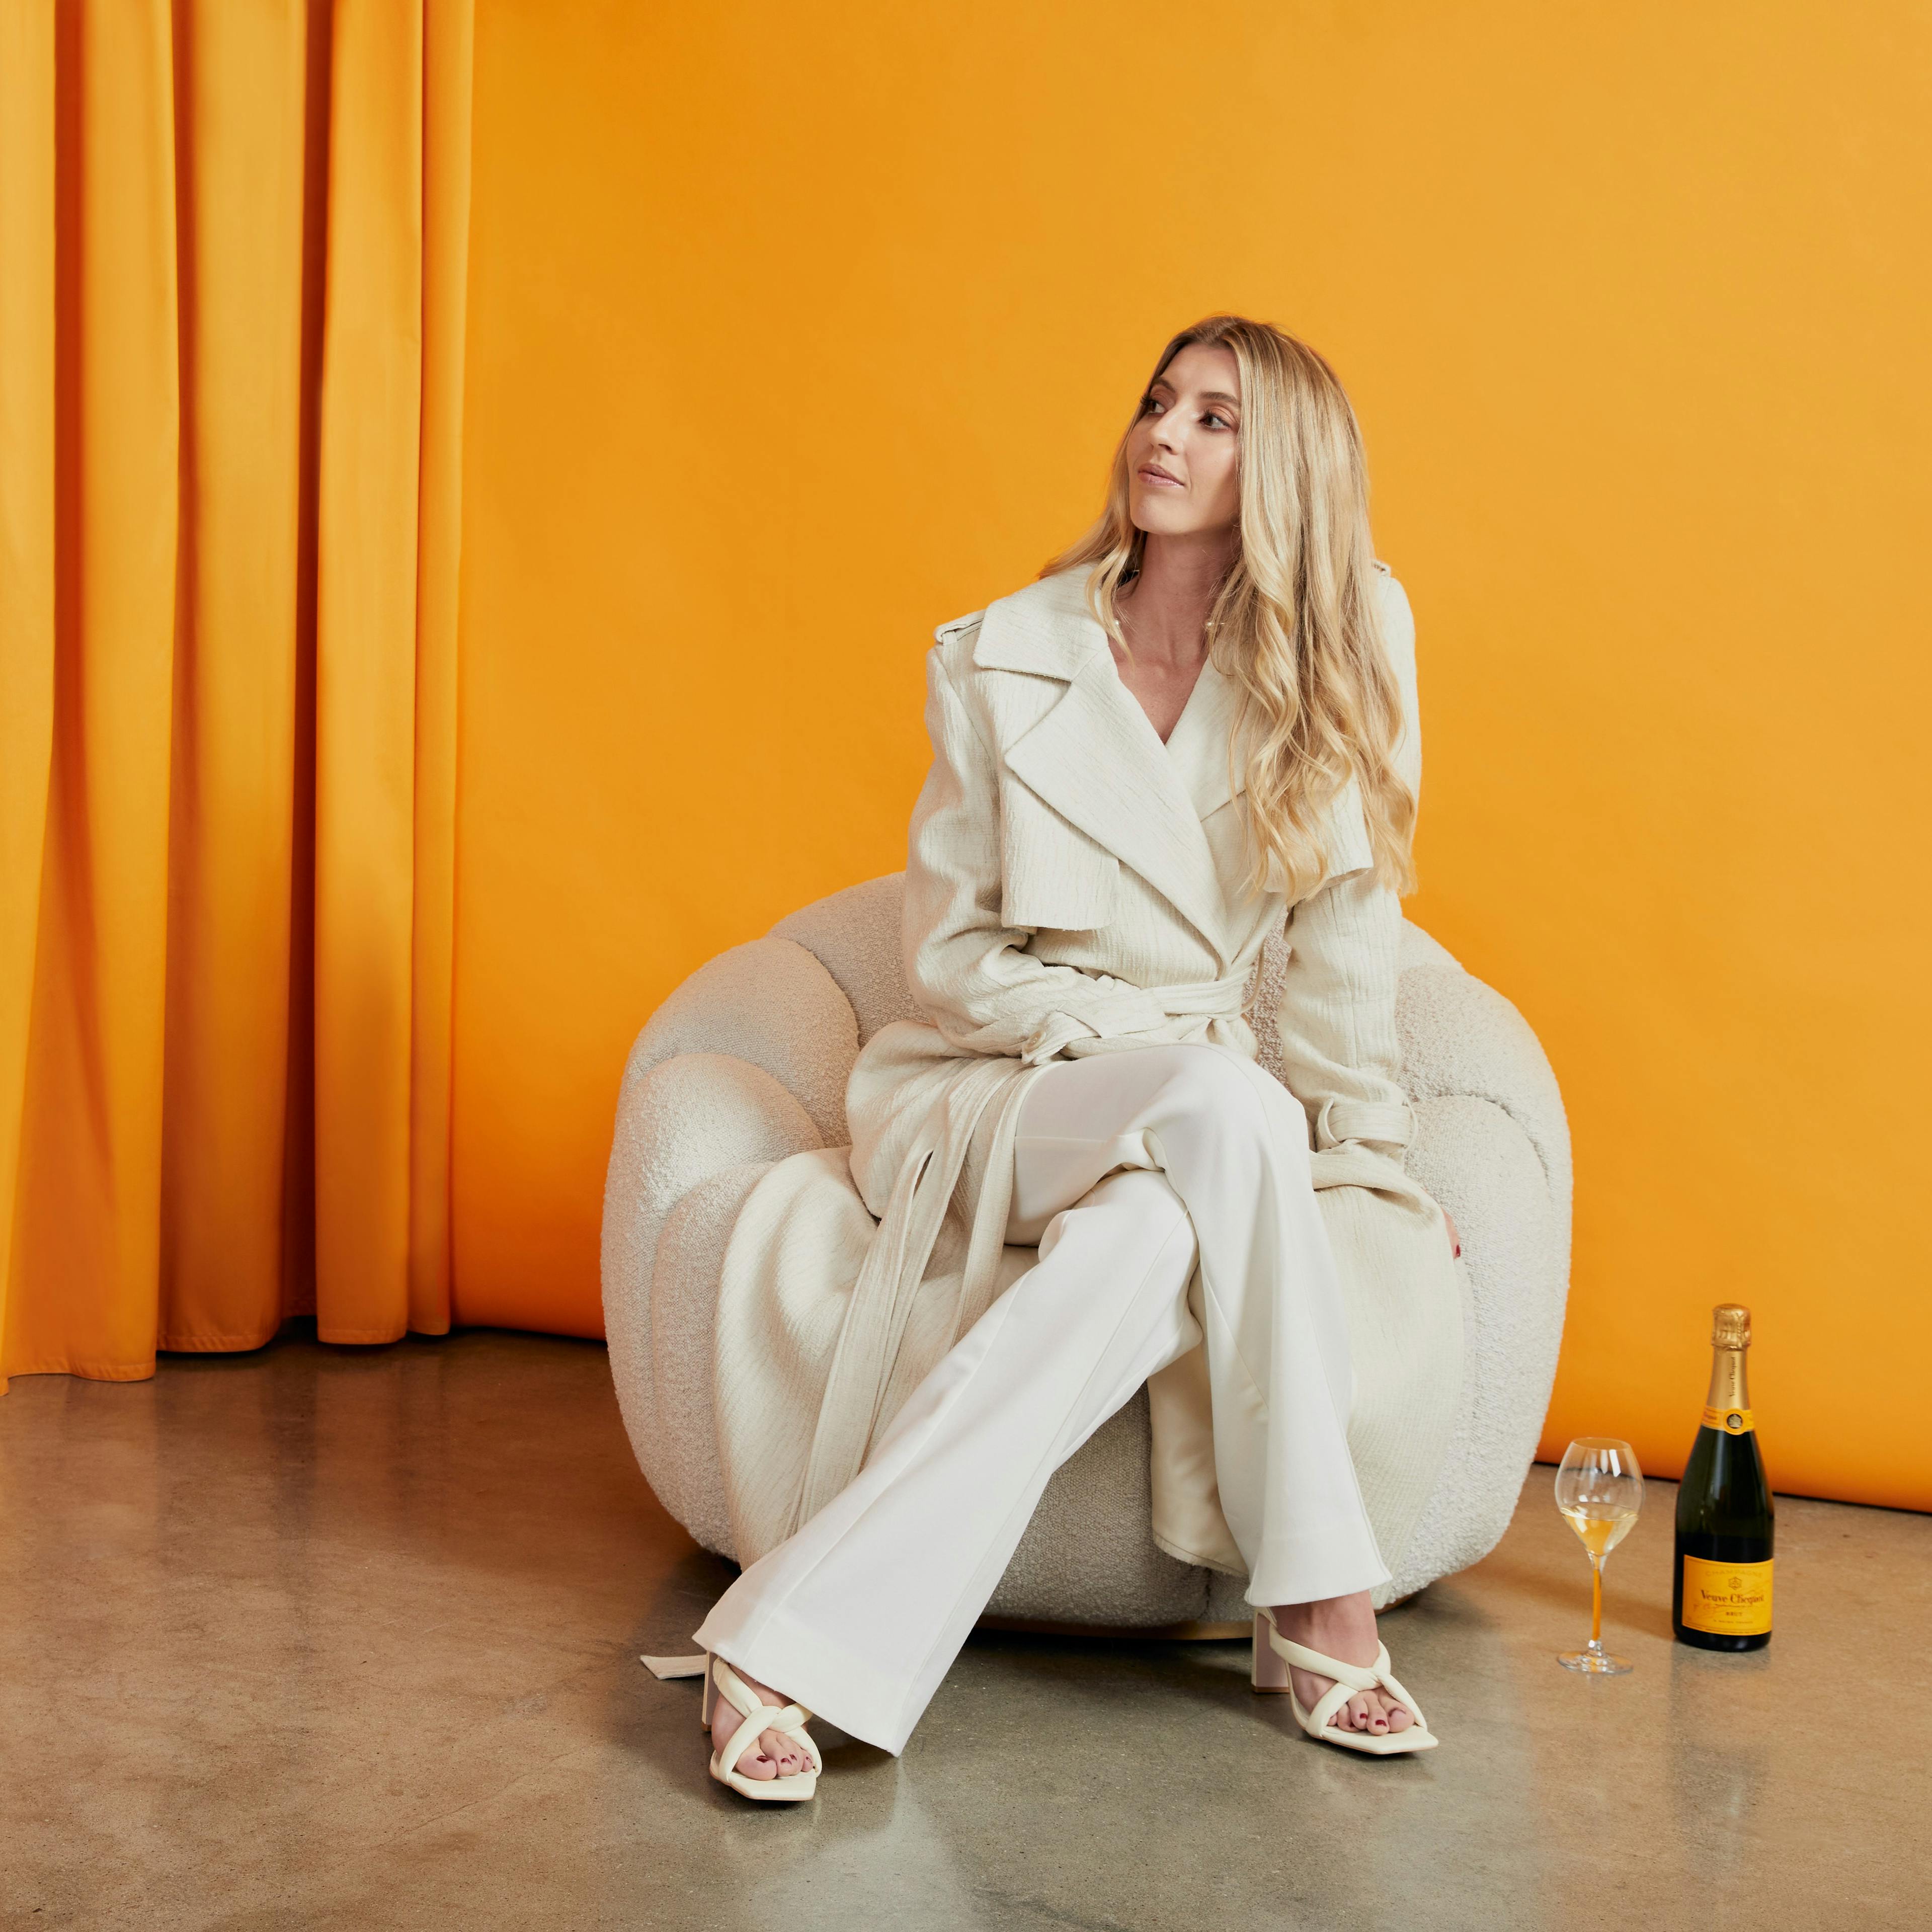 Maggie Hewitt with Veuve Clicquot champagne